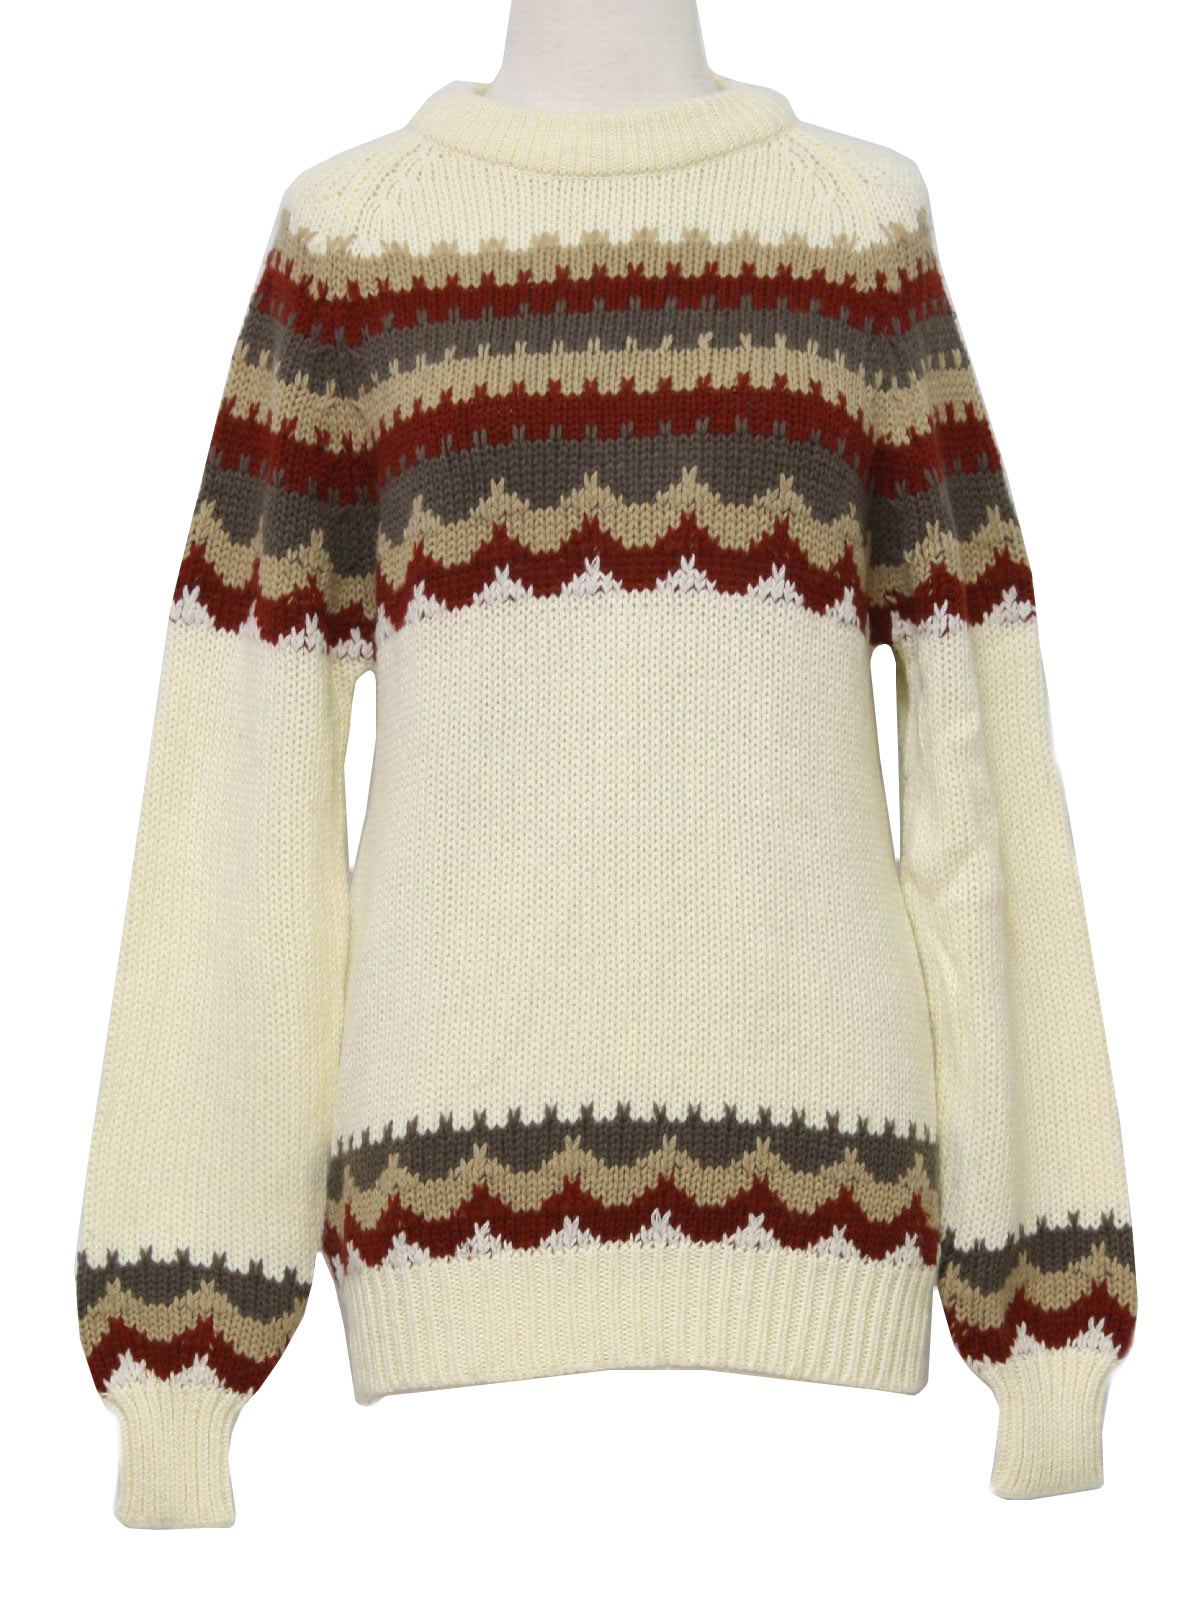 Eighties Sigallo Sweater: 80s -Sigallo- Womens off white, tan, burnt ...